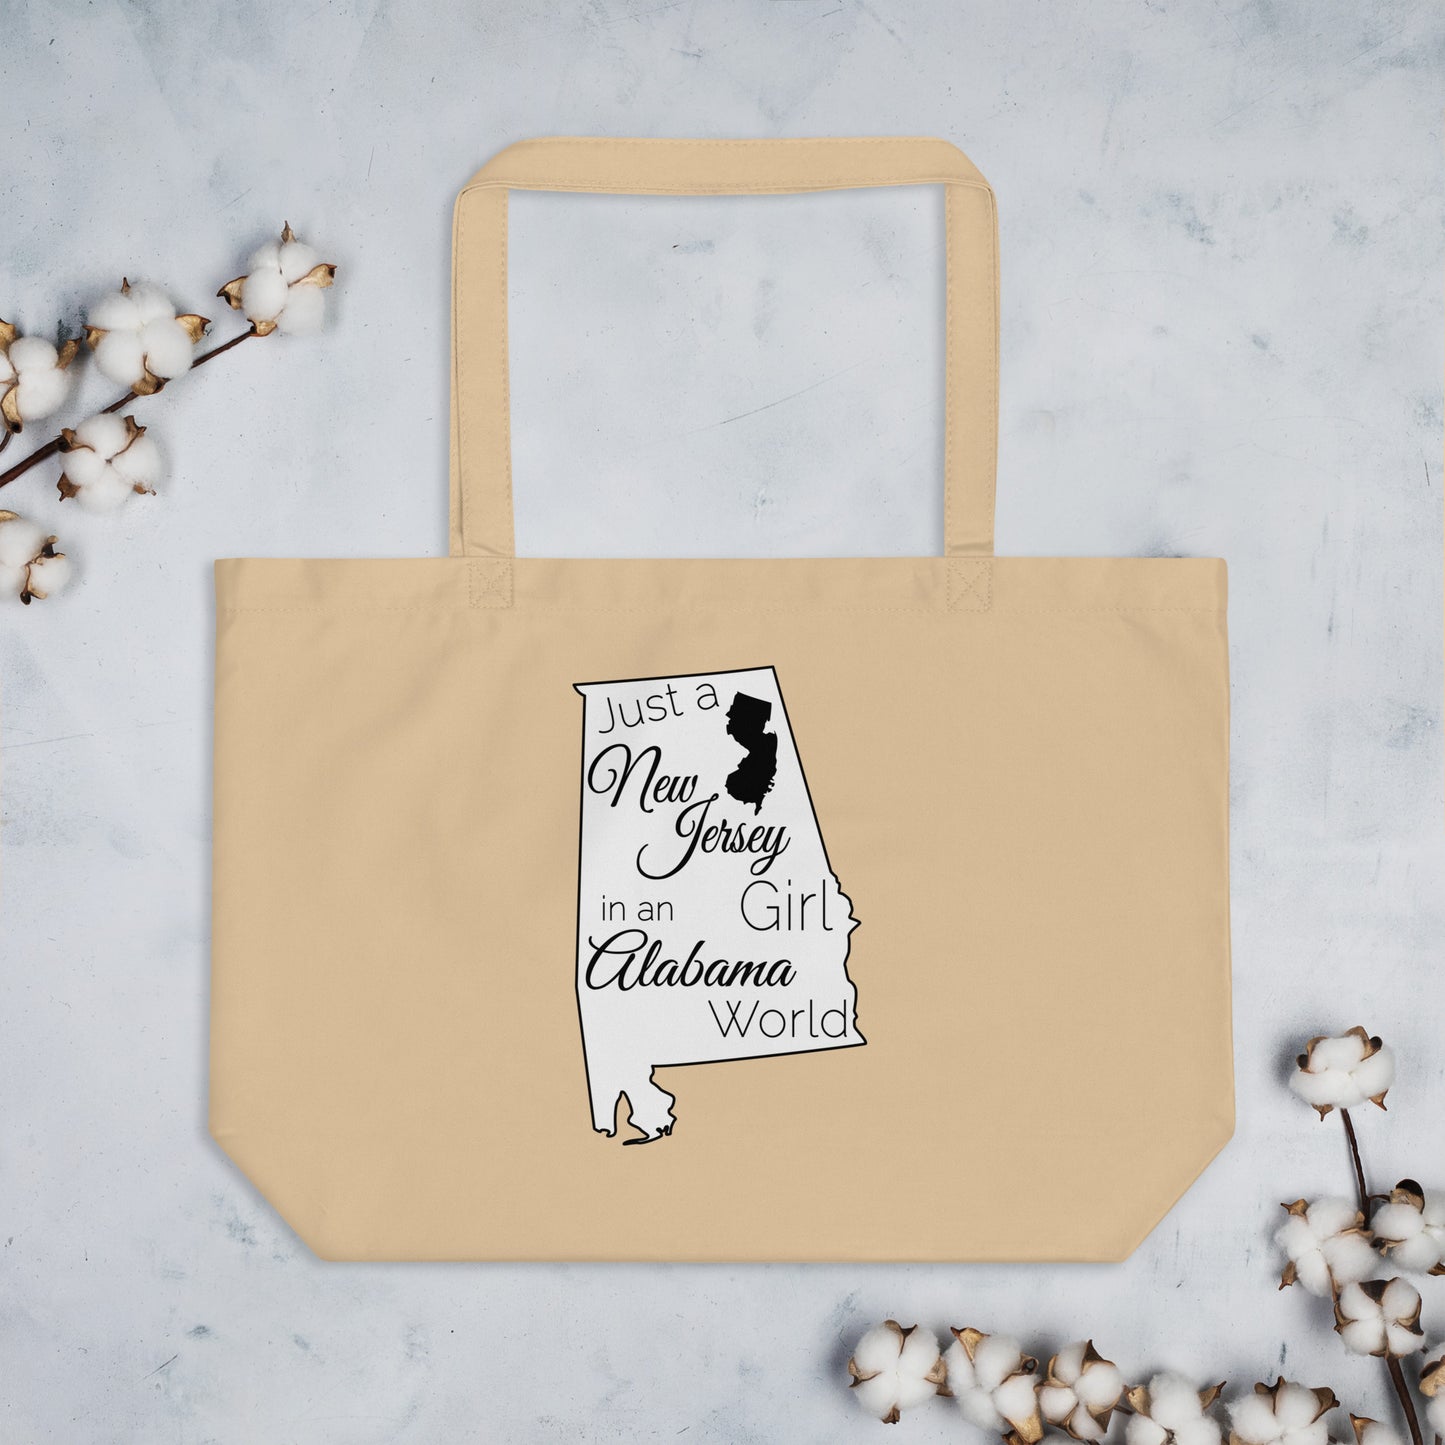 Just a New Jersey Girl in an Alabama World Large organic tote bag